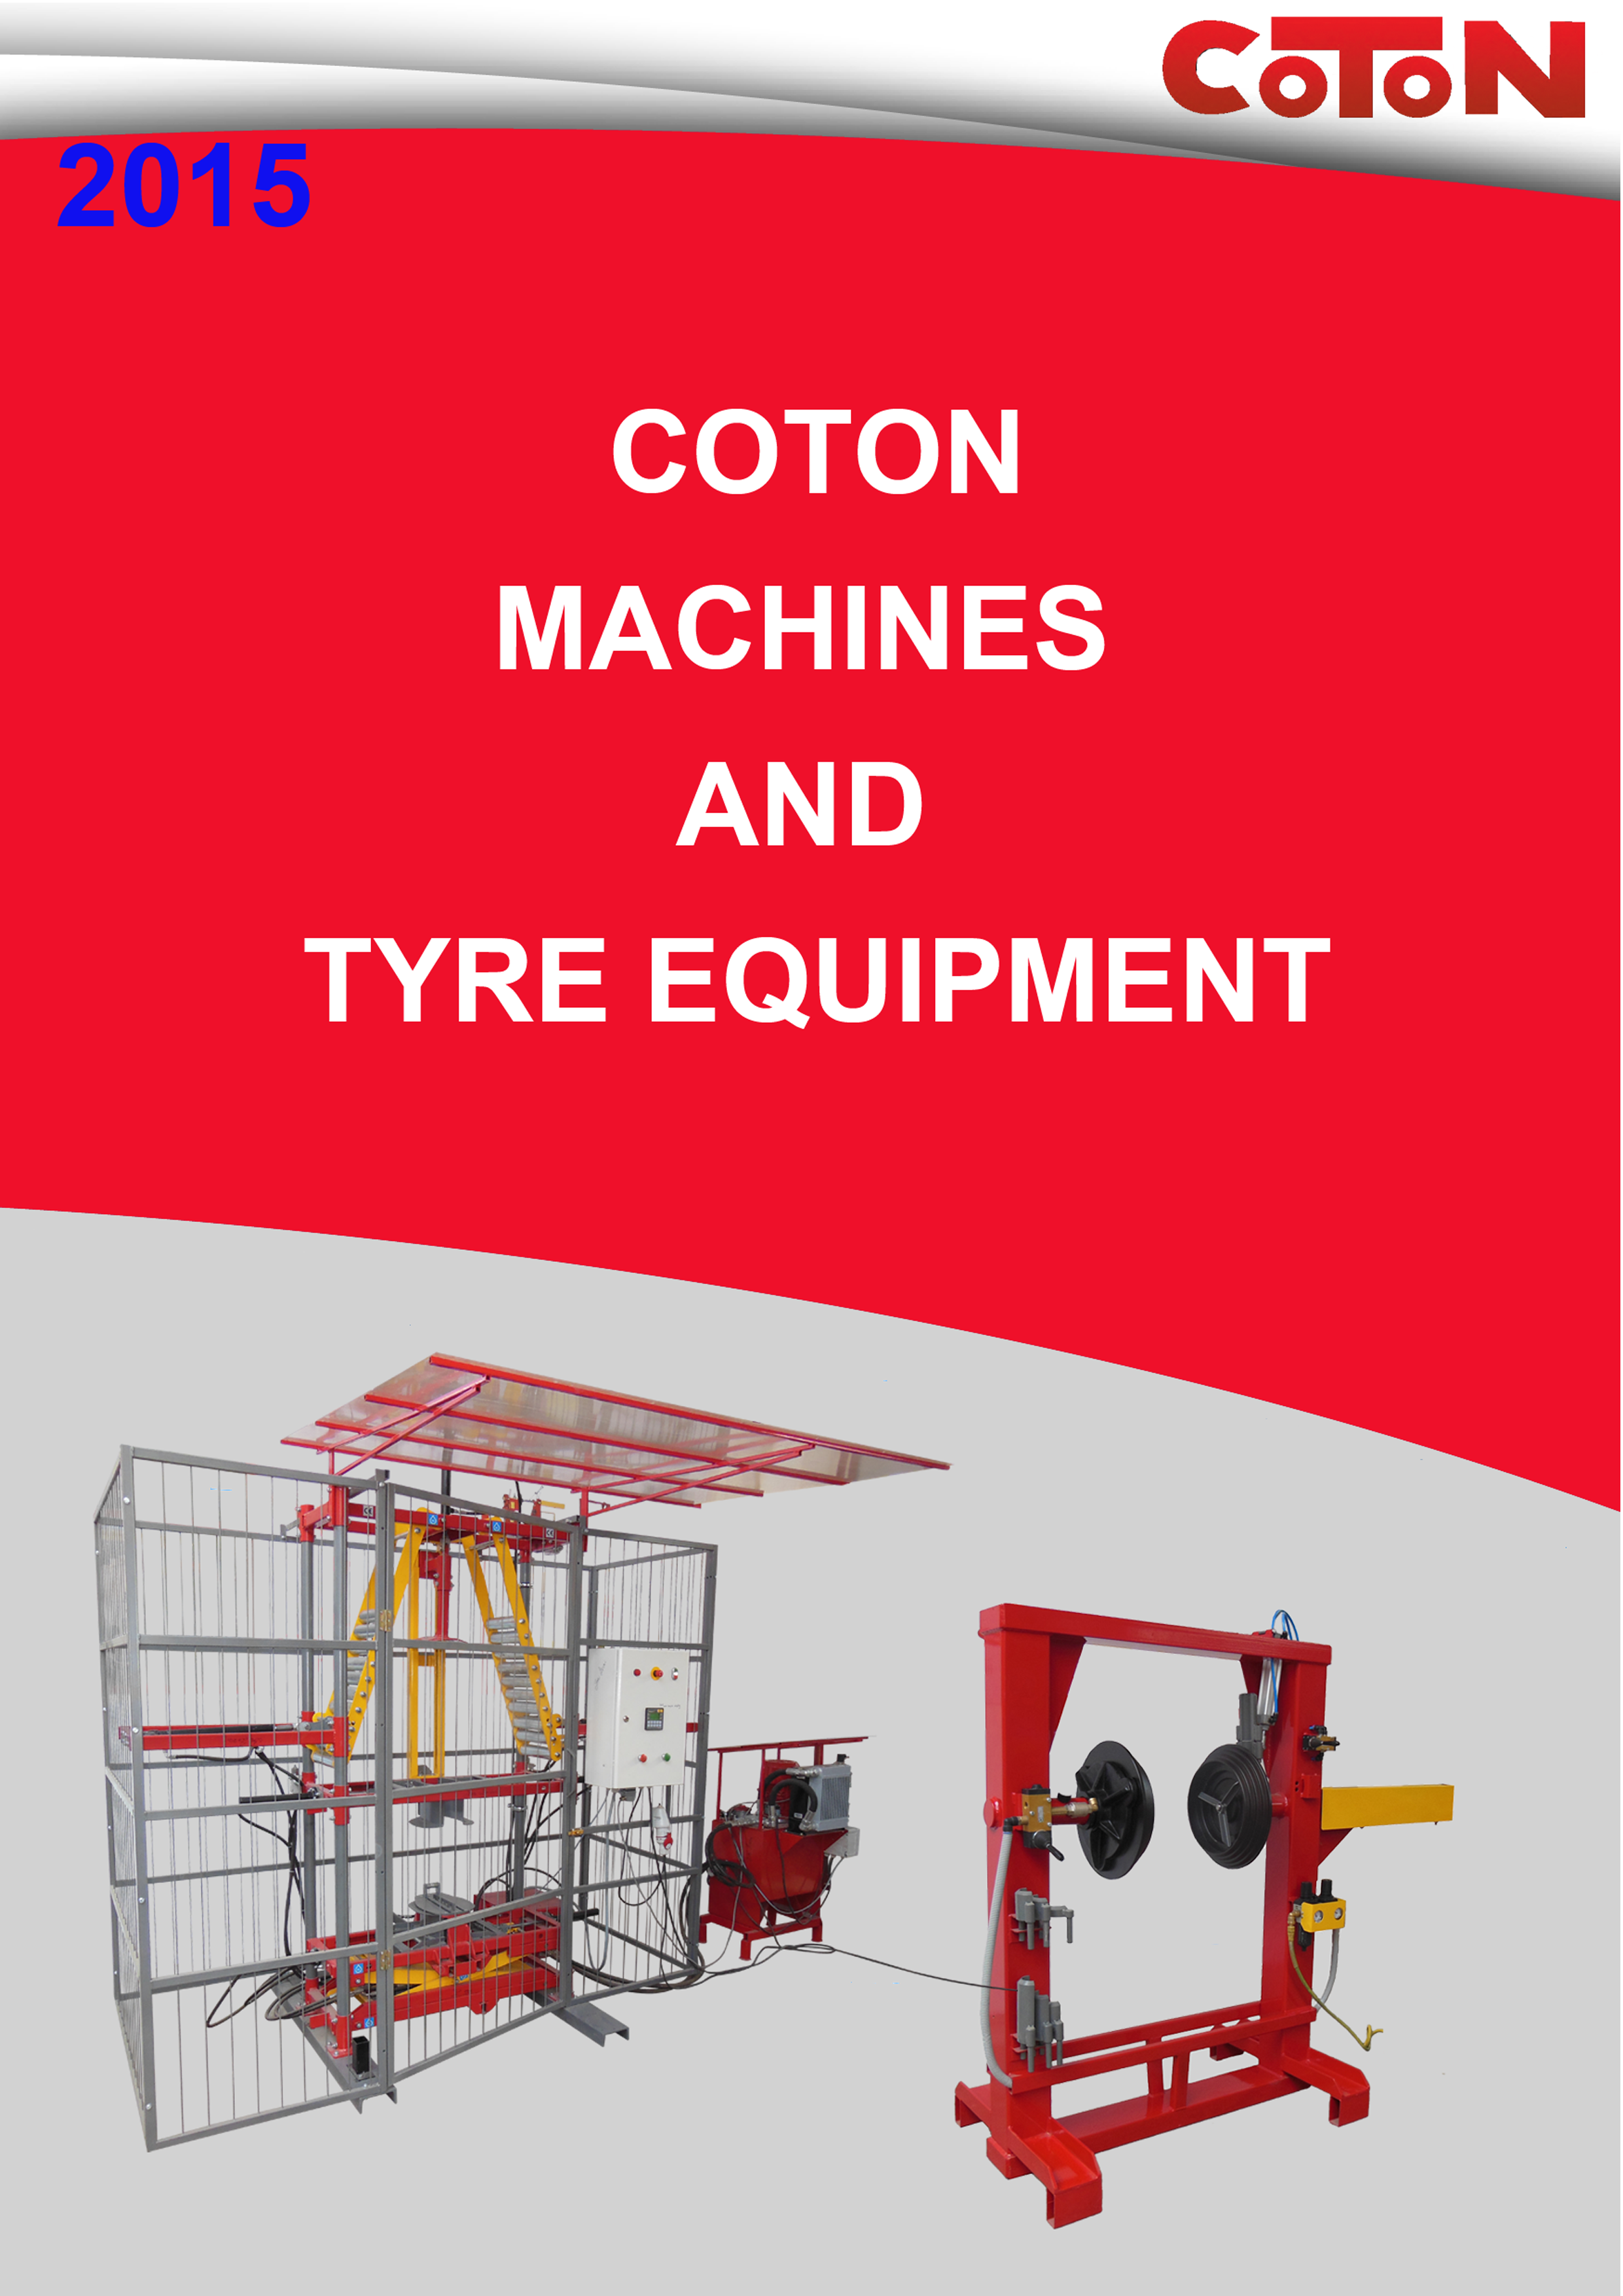 COTON CATALOGUE 2015 - MACHINES AND EQUIPMENT